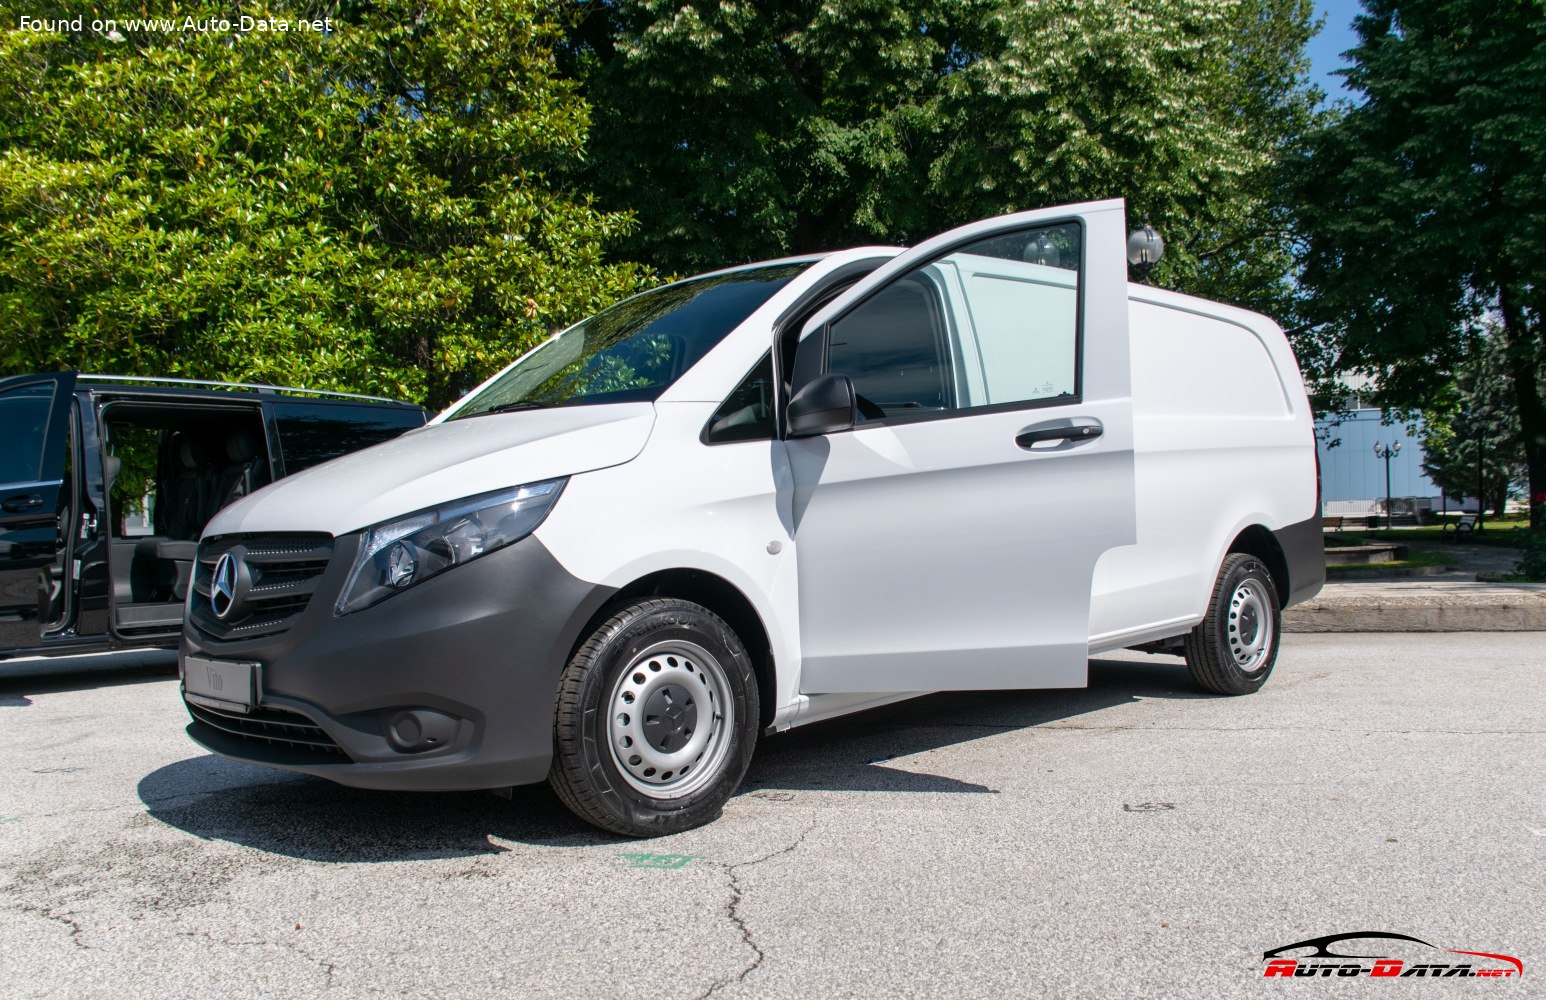 https://www.auto-data.net/images/f75/Mercedes-Benz-Vito-W447-facelift-2019-Extra-Long.jpg